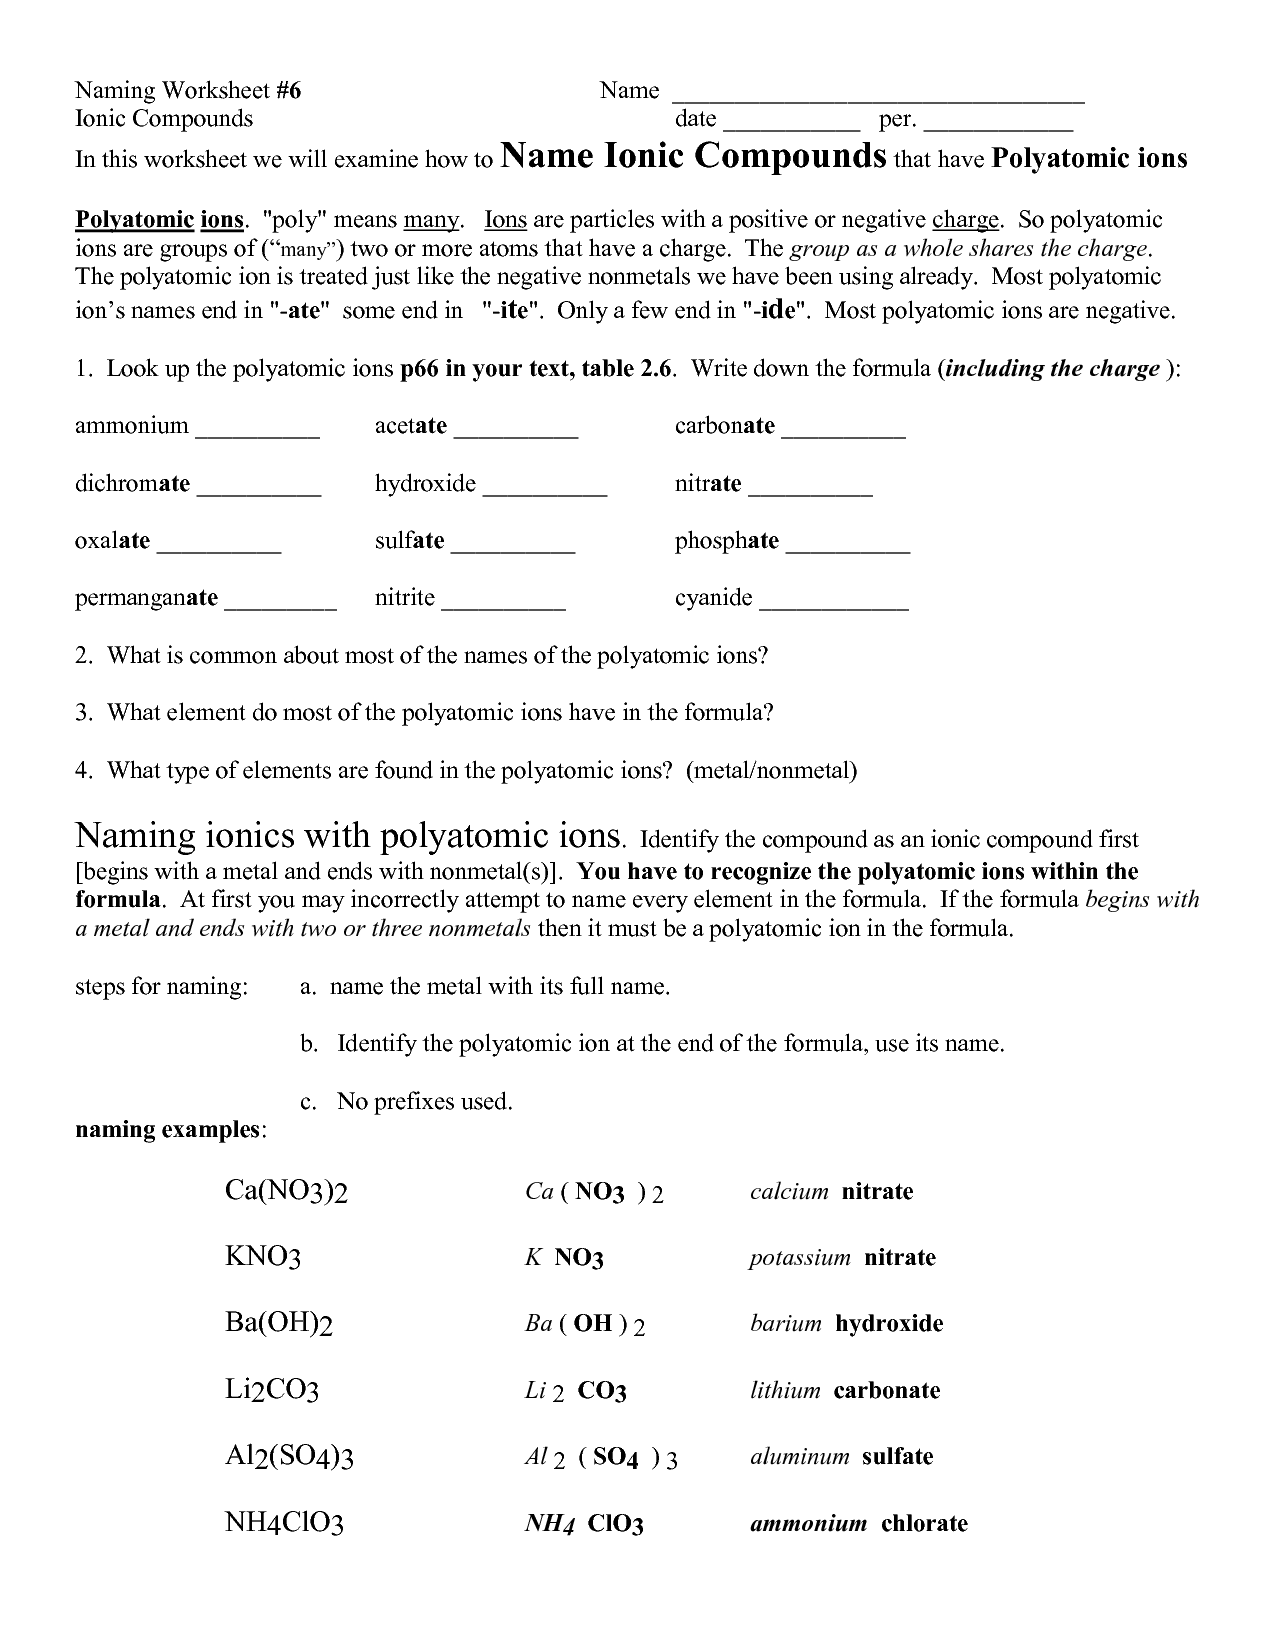 11 Best Images of Naming Molecular Compounds Worksheet Answers Binary